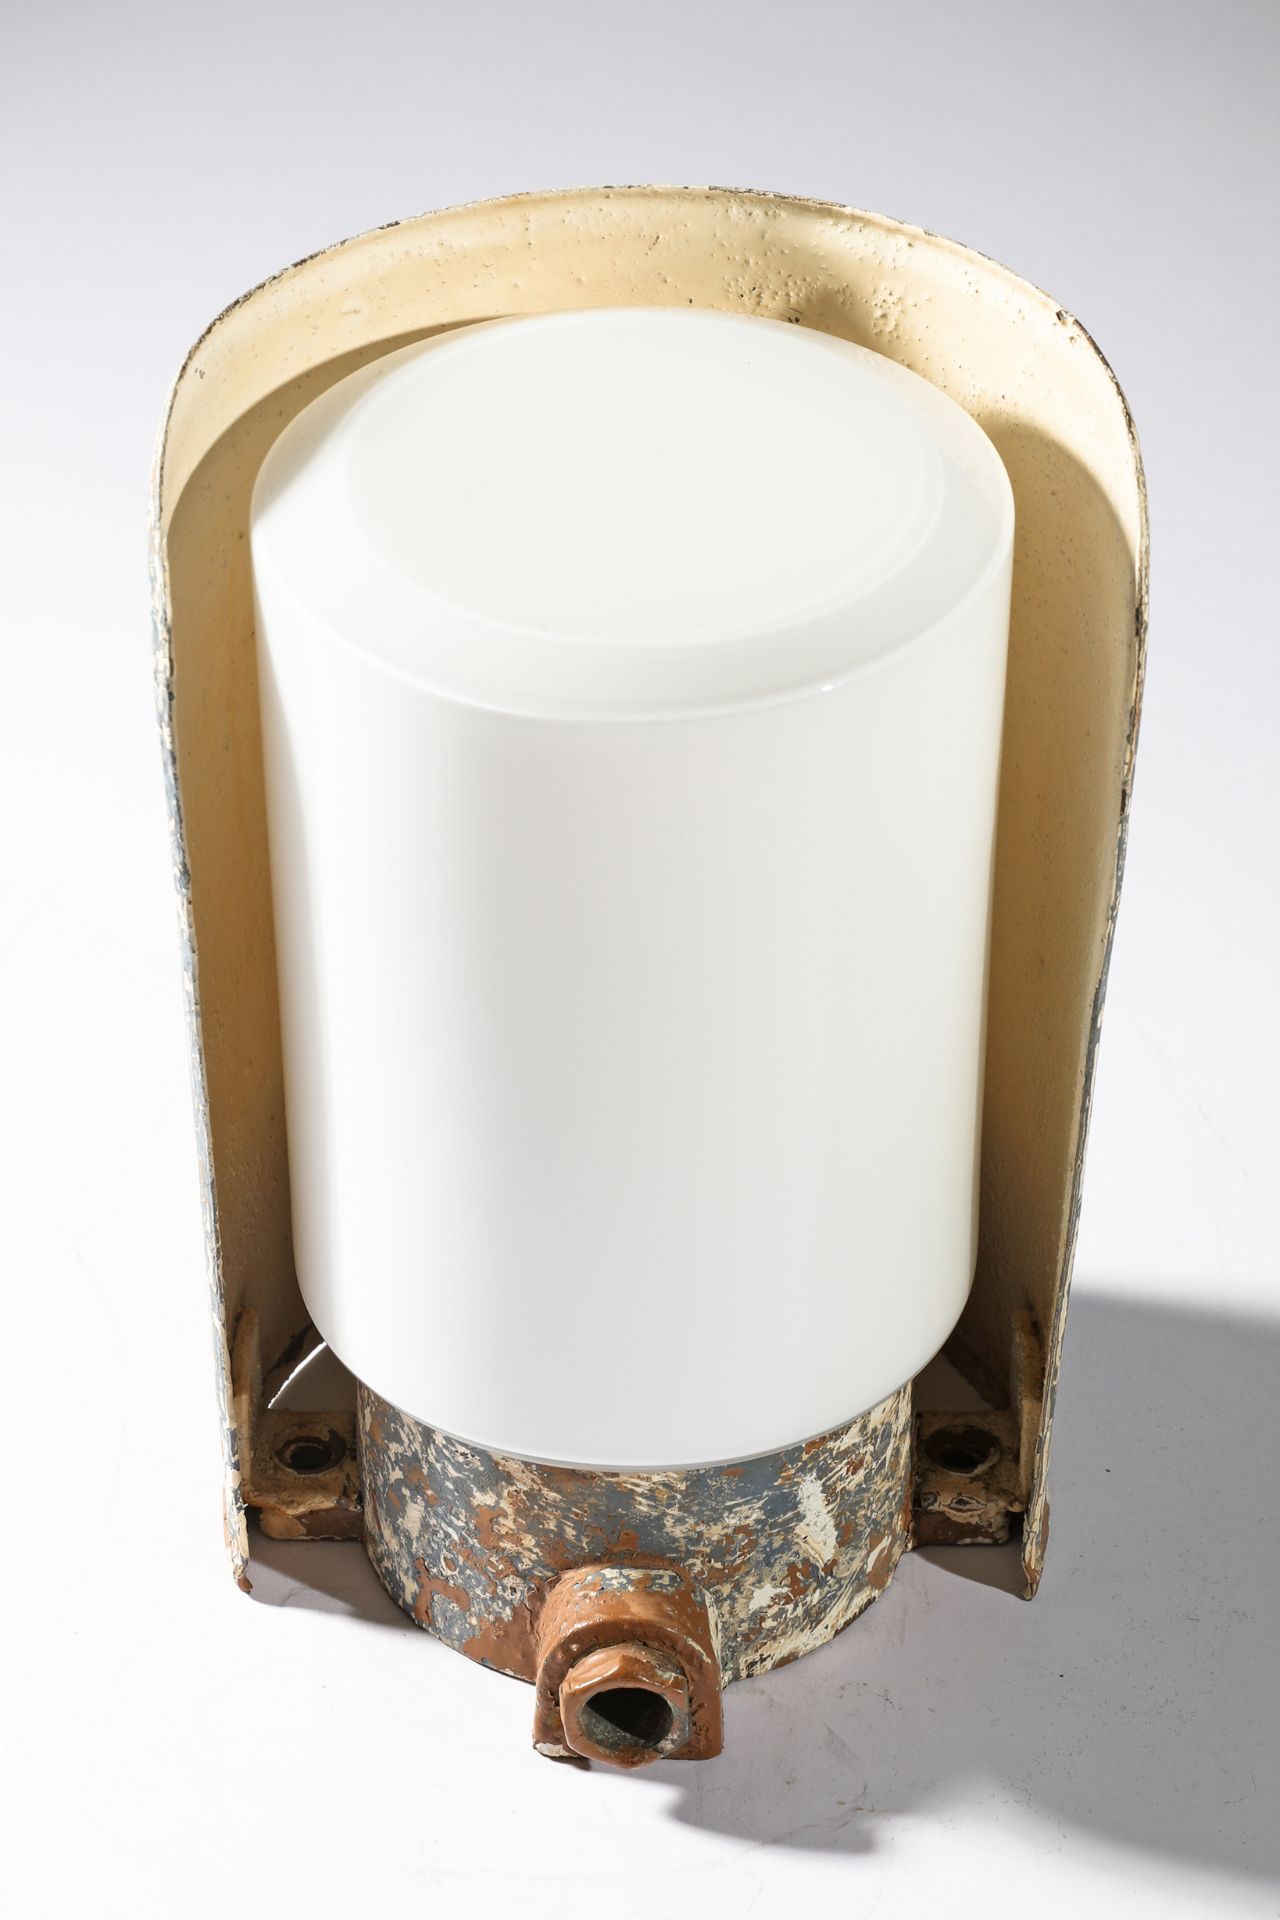 Paavo Tynell, Taito Oy, outdoor Wall Lamp Model 7307 - Image 2 of 3